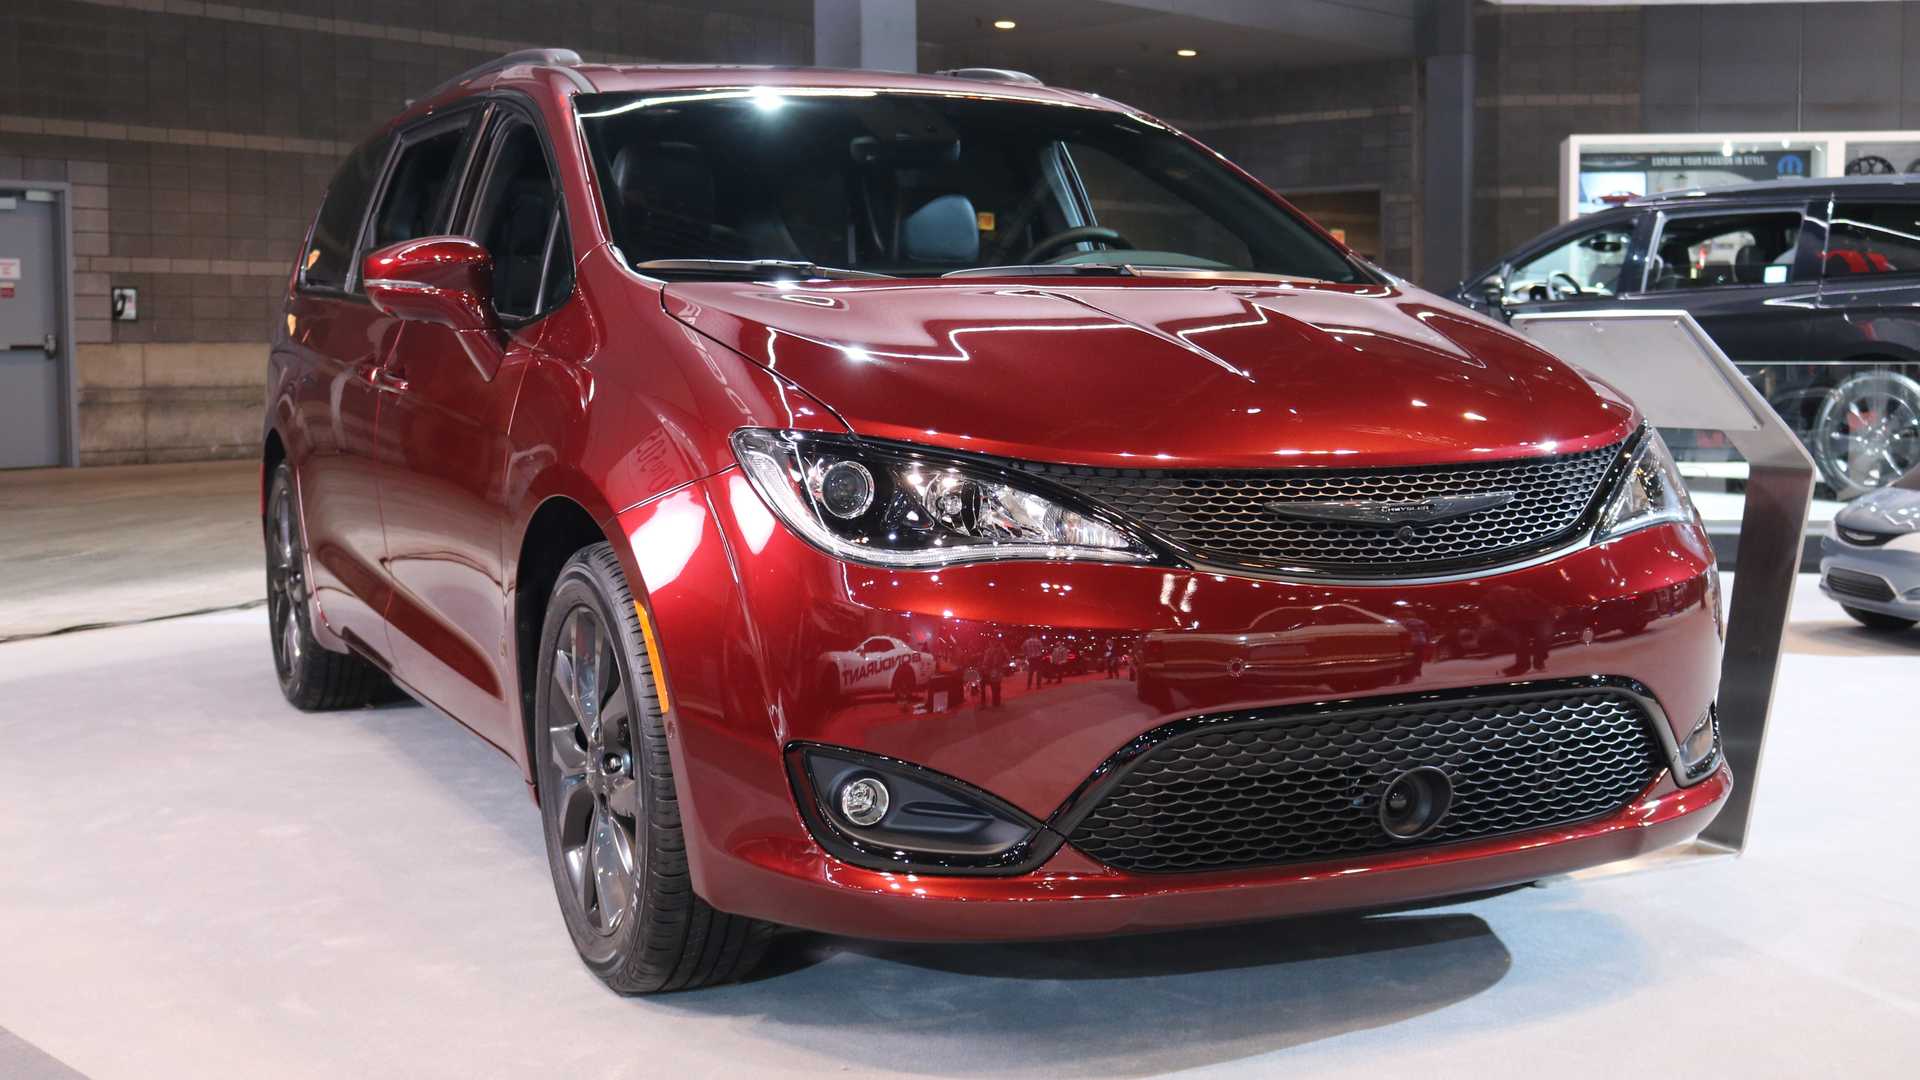 Chrysler Pacifica Will Cost More Than Voyager